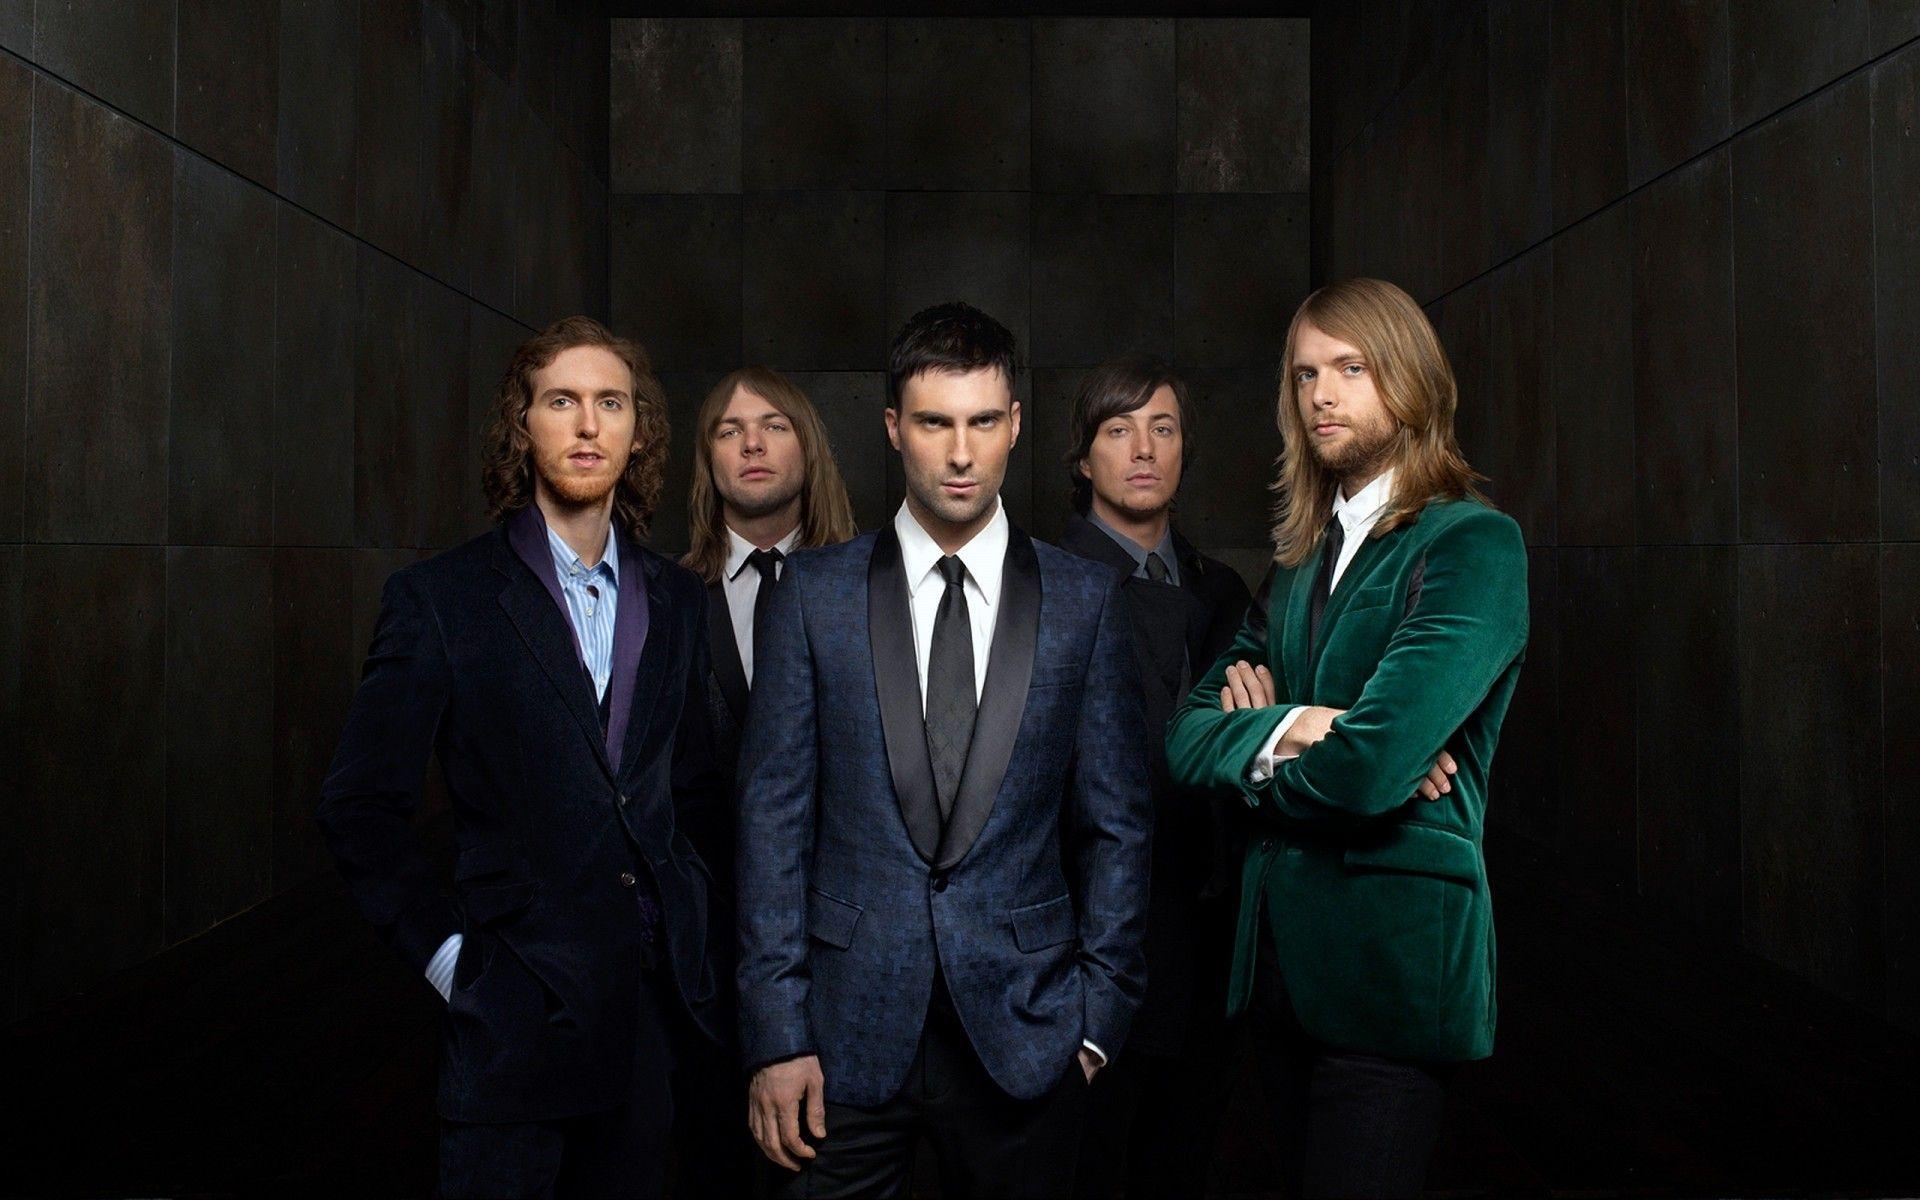 Maroon 5 Band. Android wallpaper for free